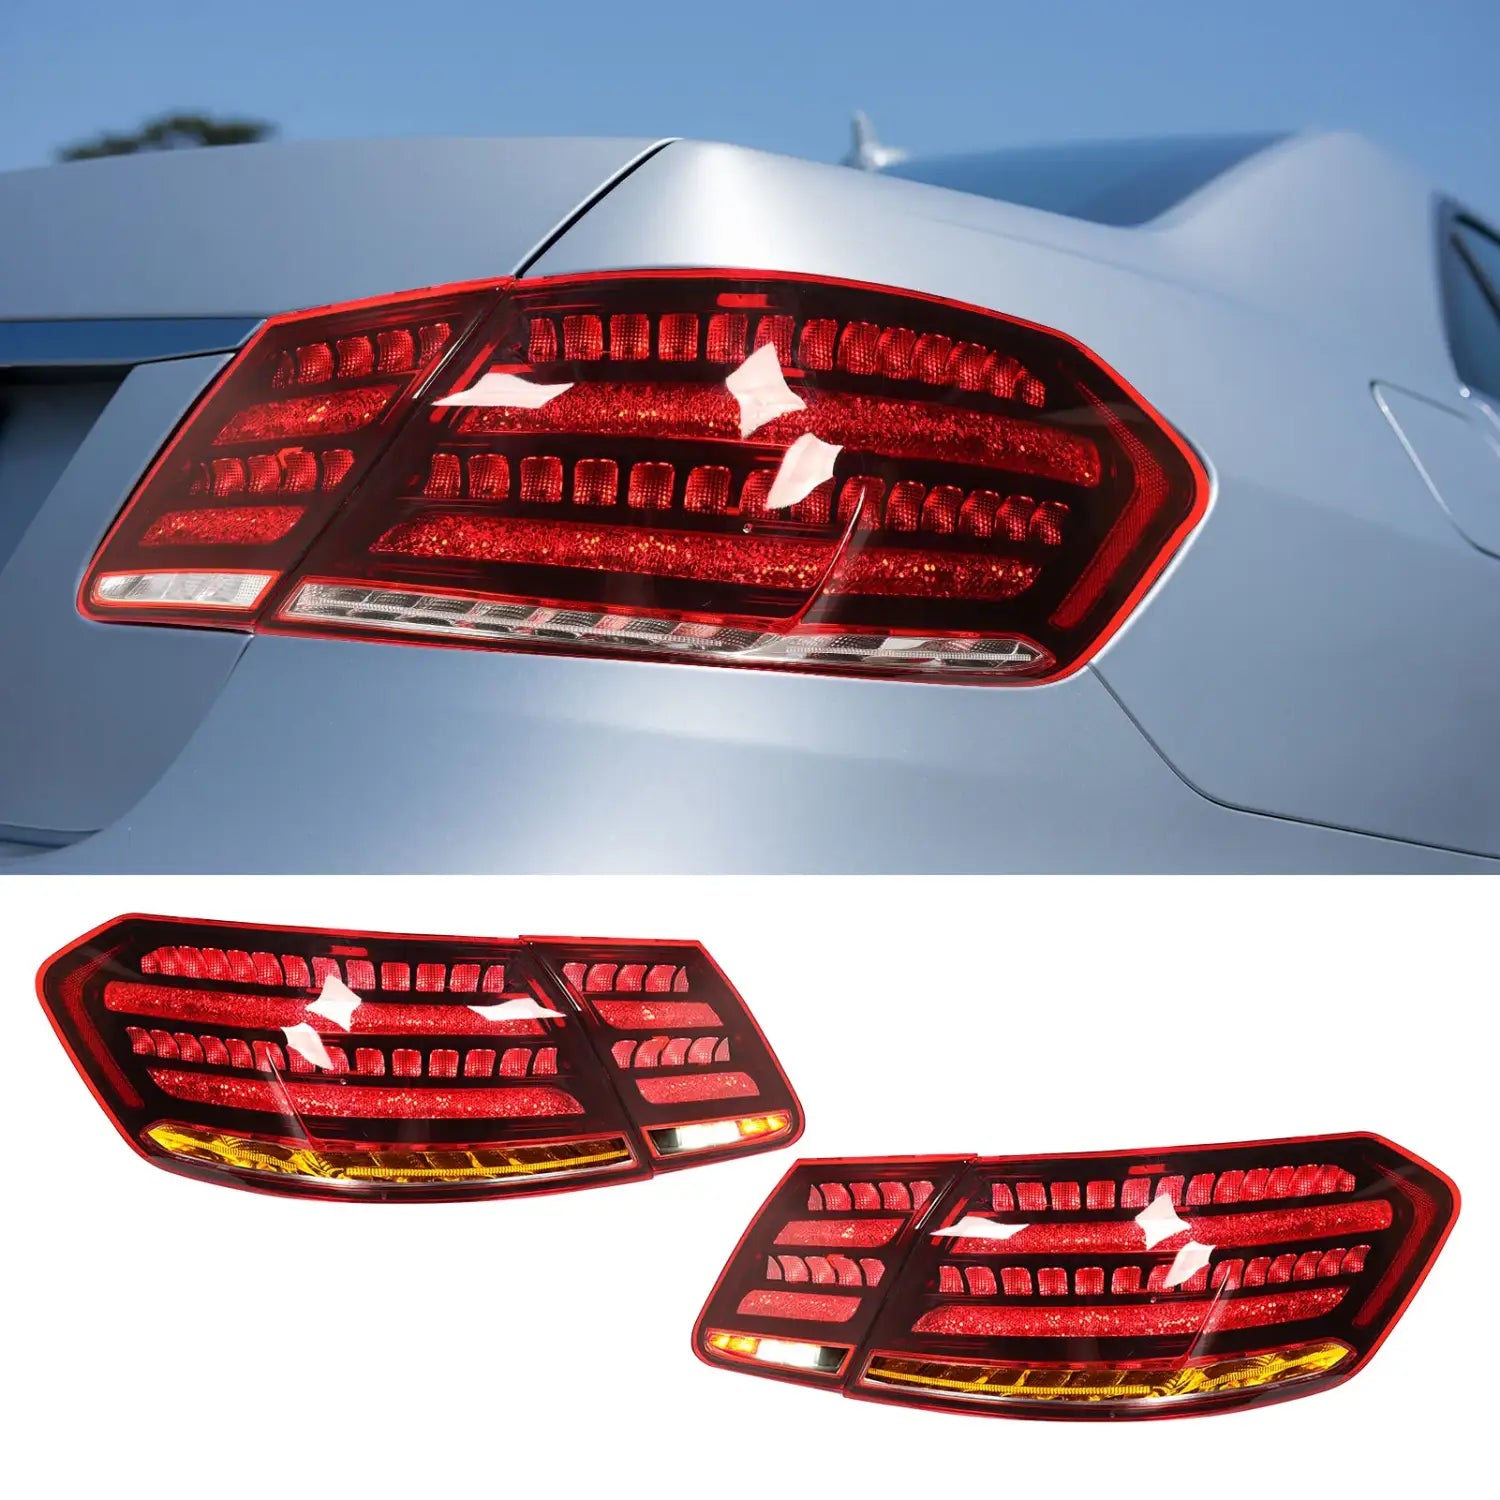 LED Rear Lamp LED Taillights for Maybach LED Tail Light Rear